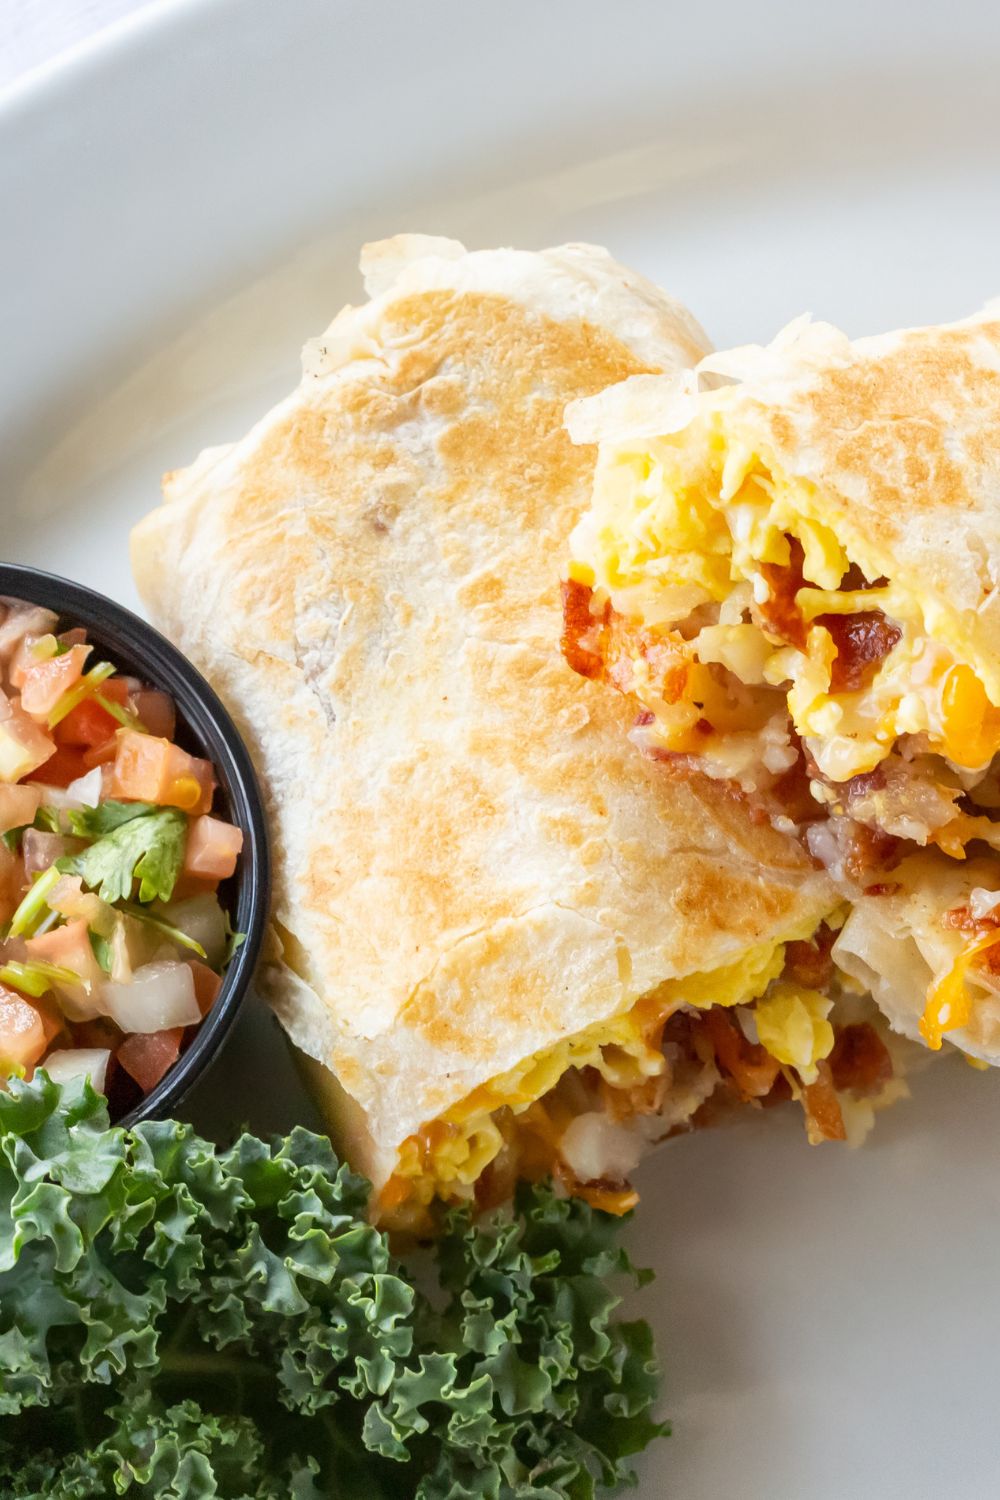 Southwest Breakfast Burrito - Low Carb, High Protein - Fit Mom Journey